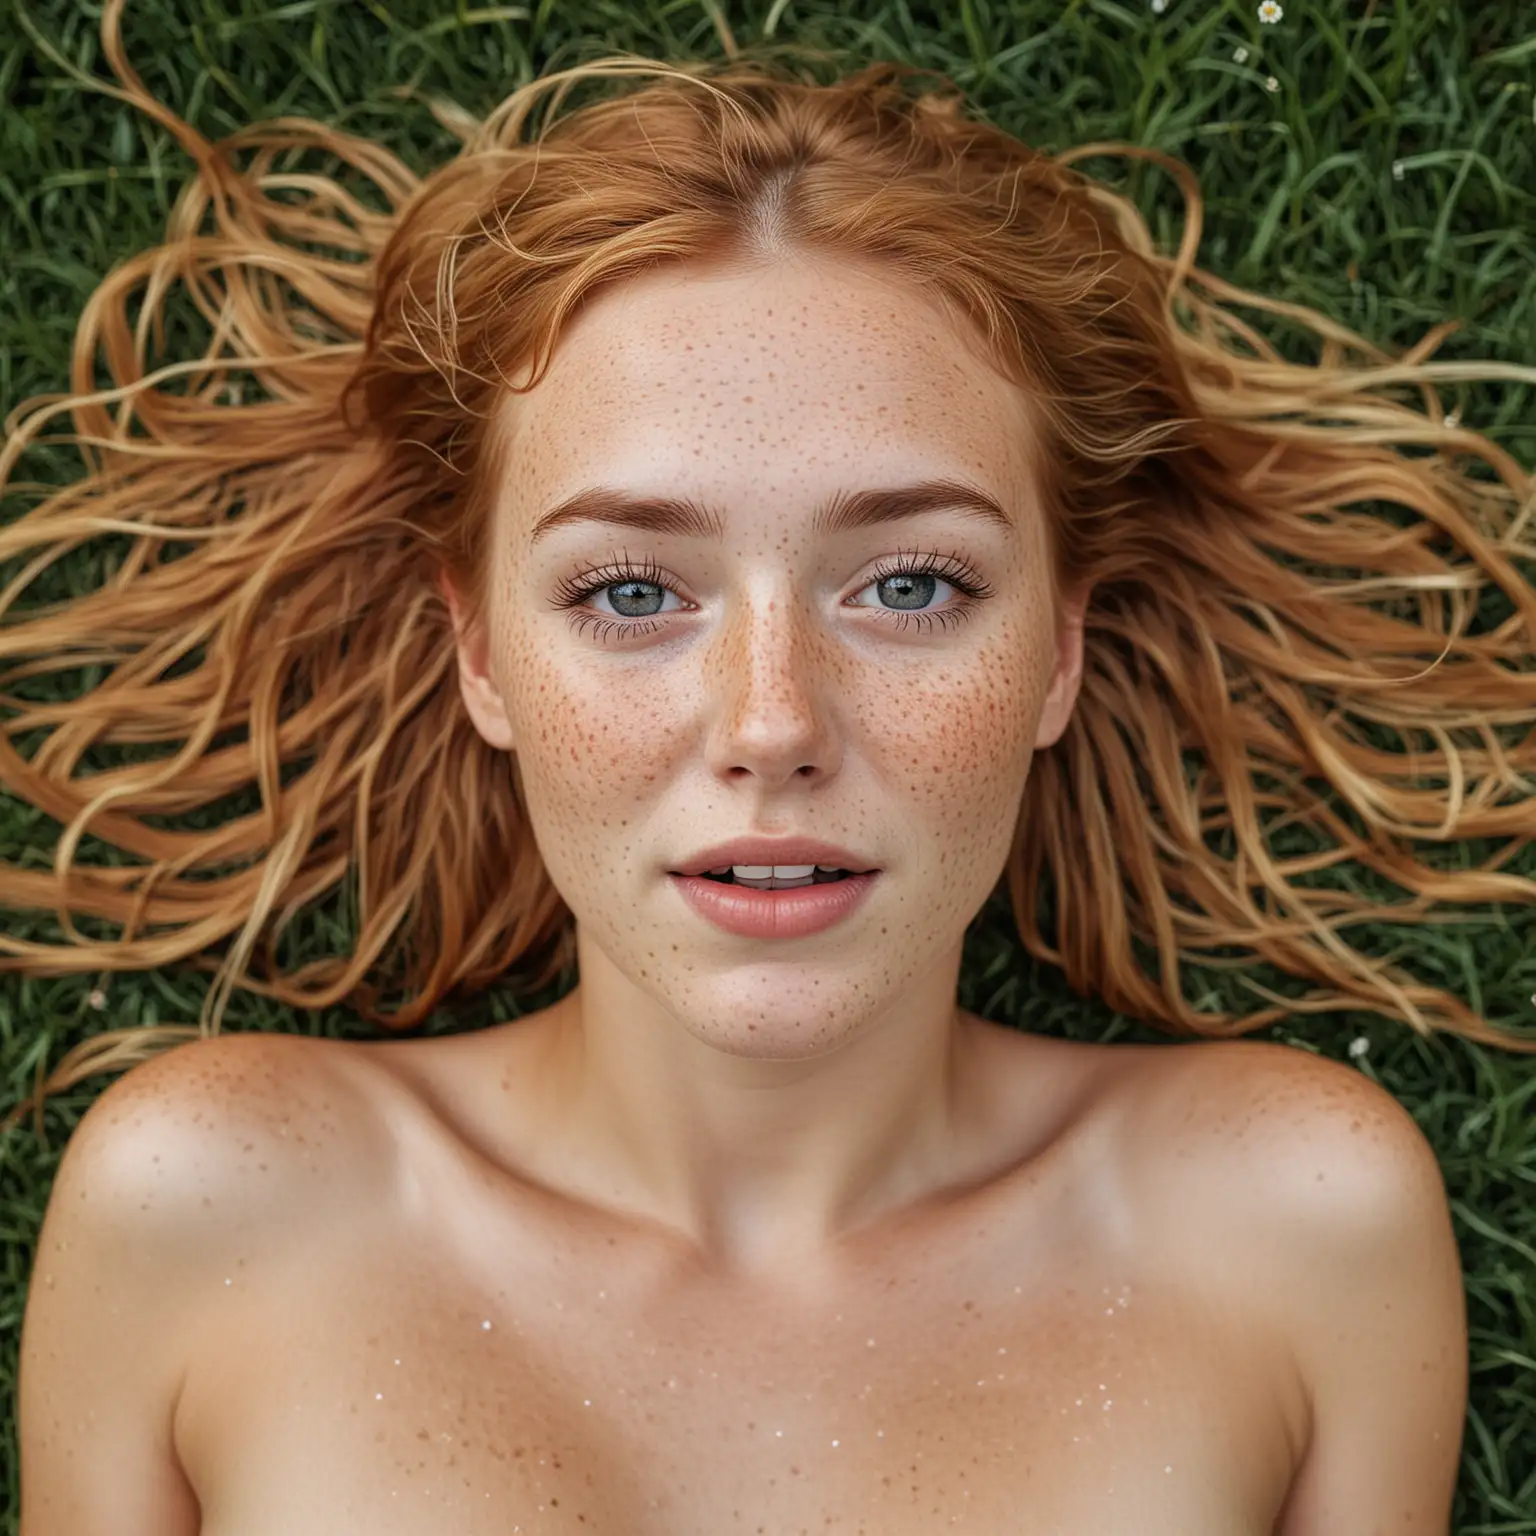 Surprised Blonde Girl Laying in Grass with Freckles